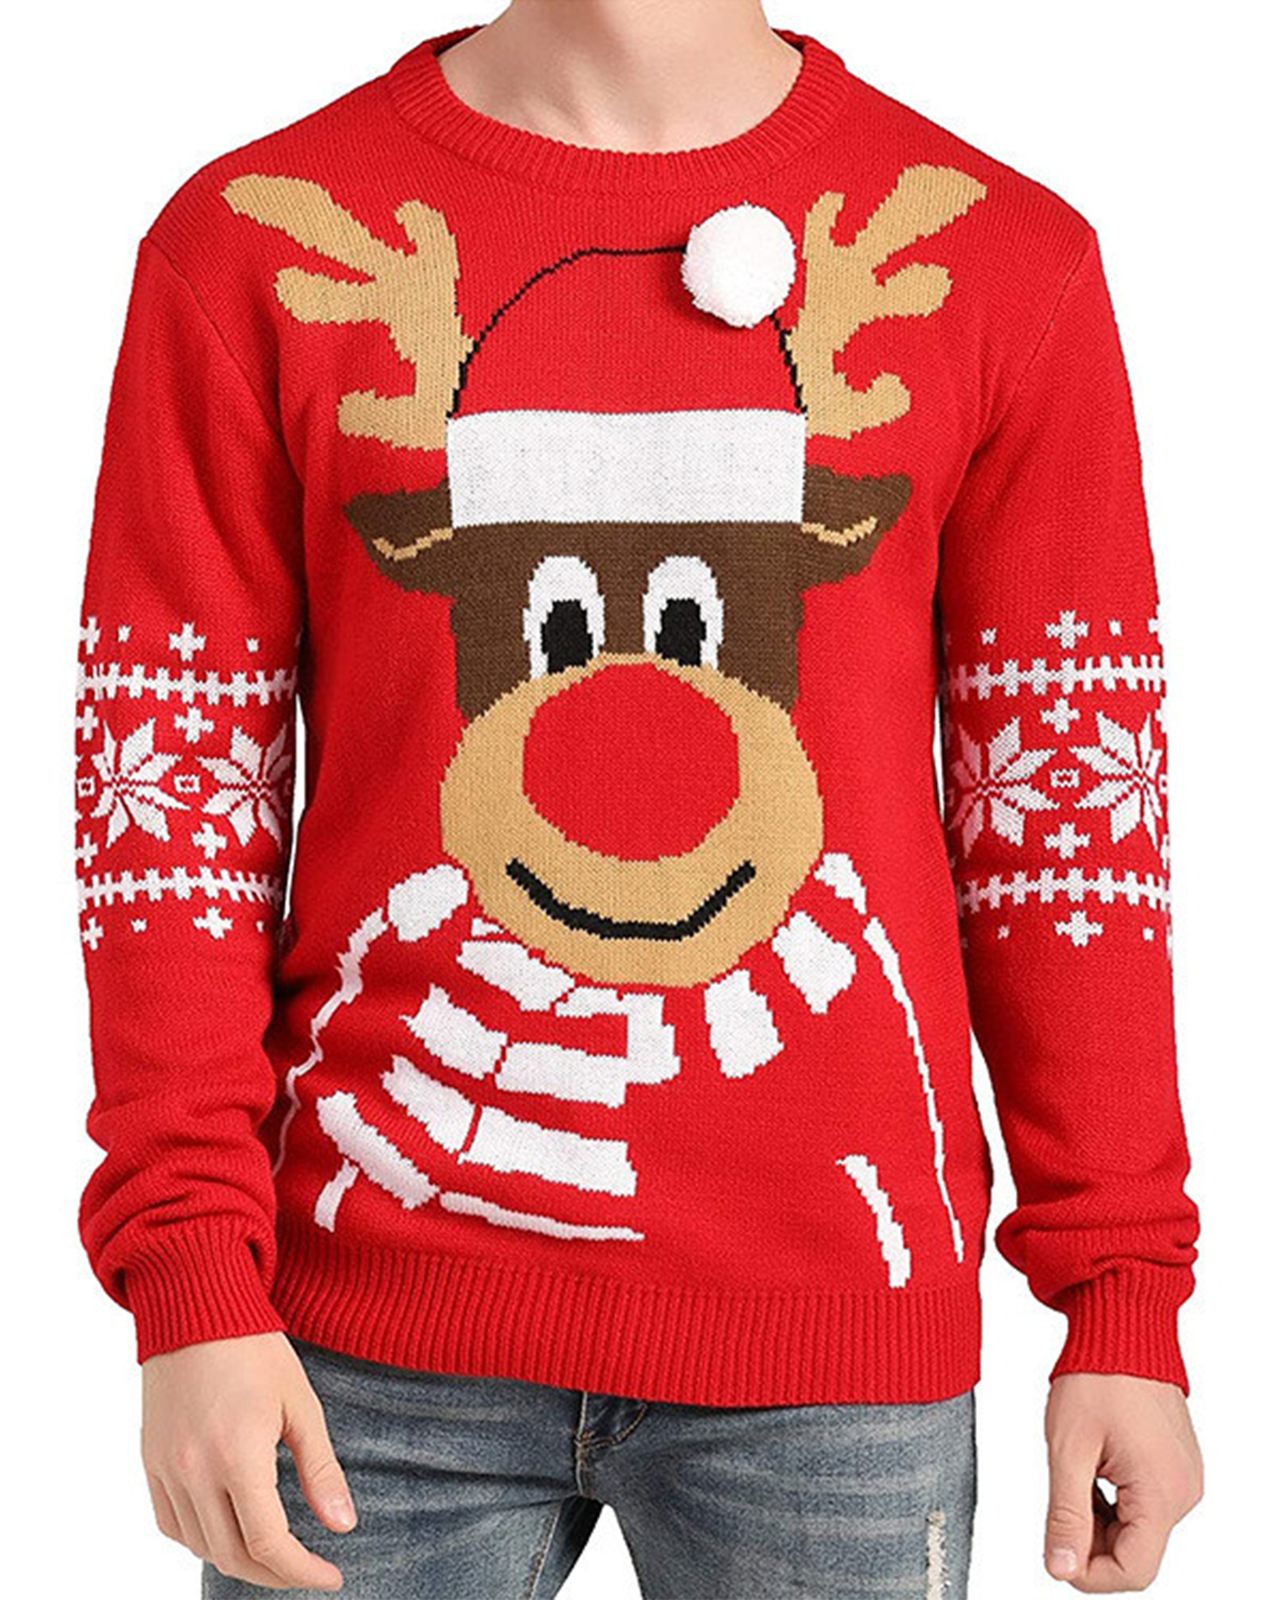 Deluxe Red Rudolph the Reindeer Sweater